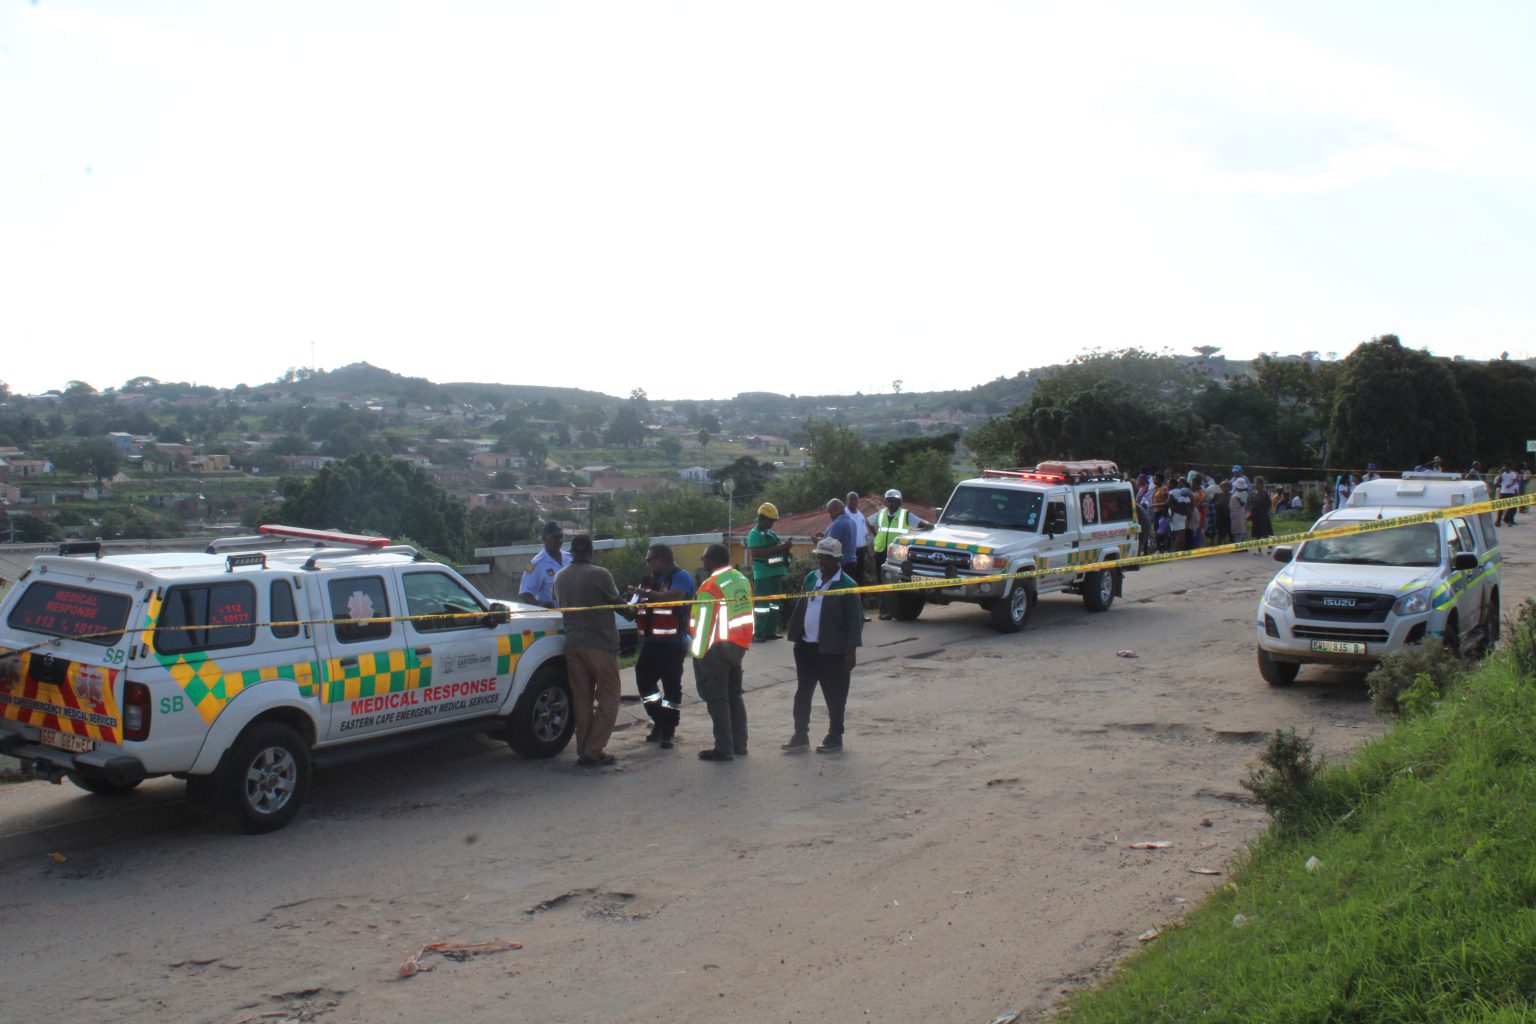 The scene of the taxi crash that claimed the lives of six people in Makhanda on Saturday. Photo: Luvuyo Mjekula